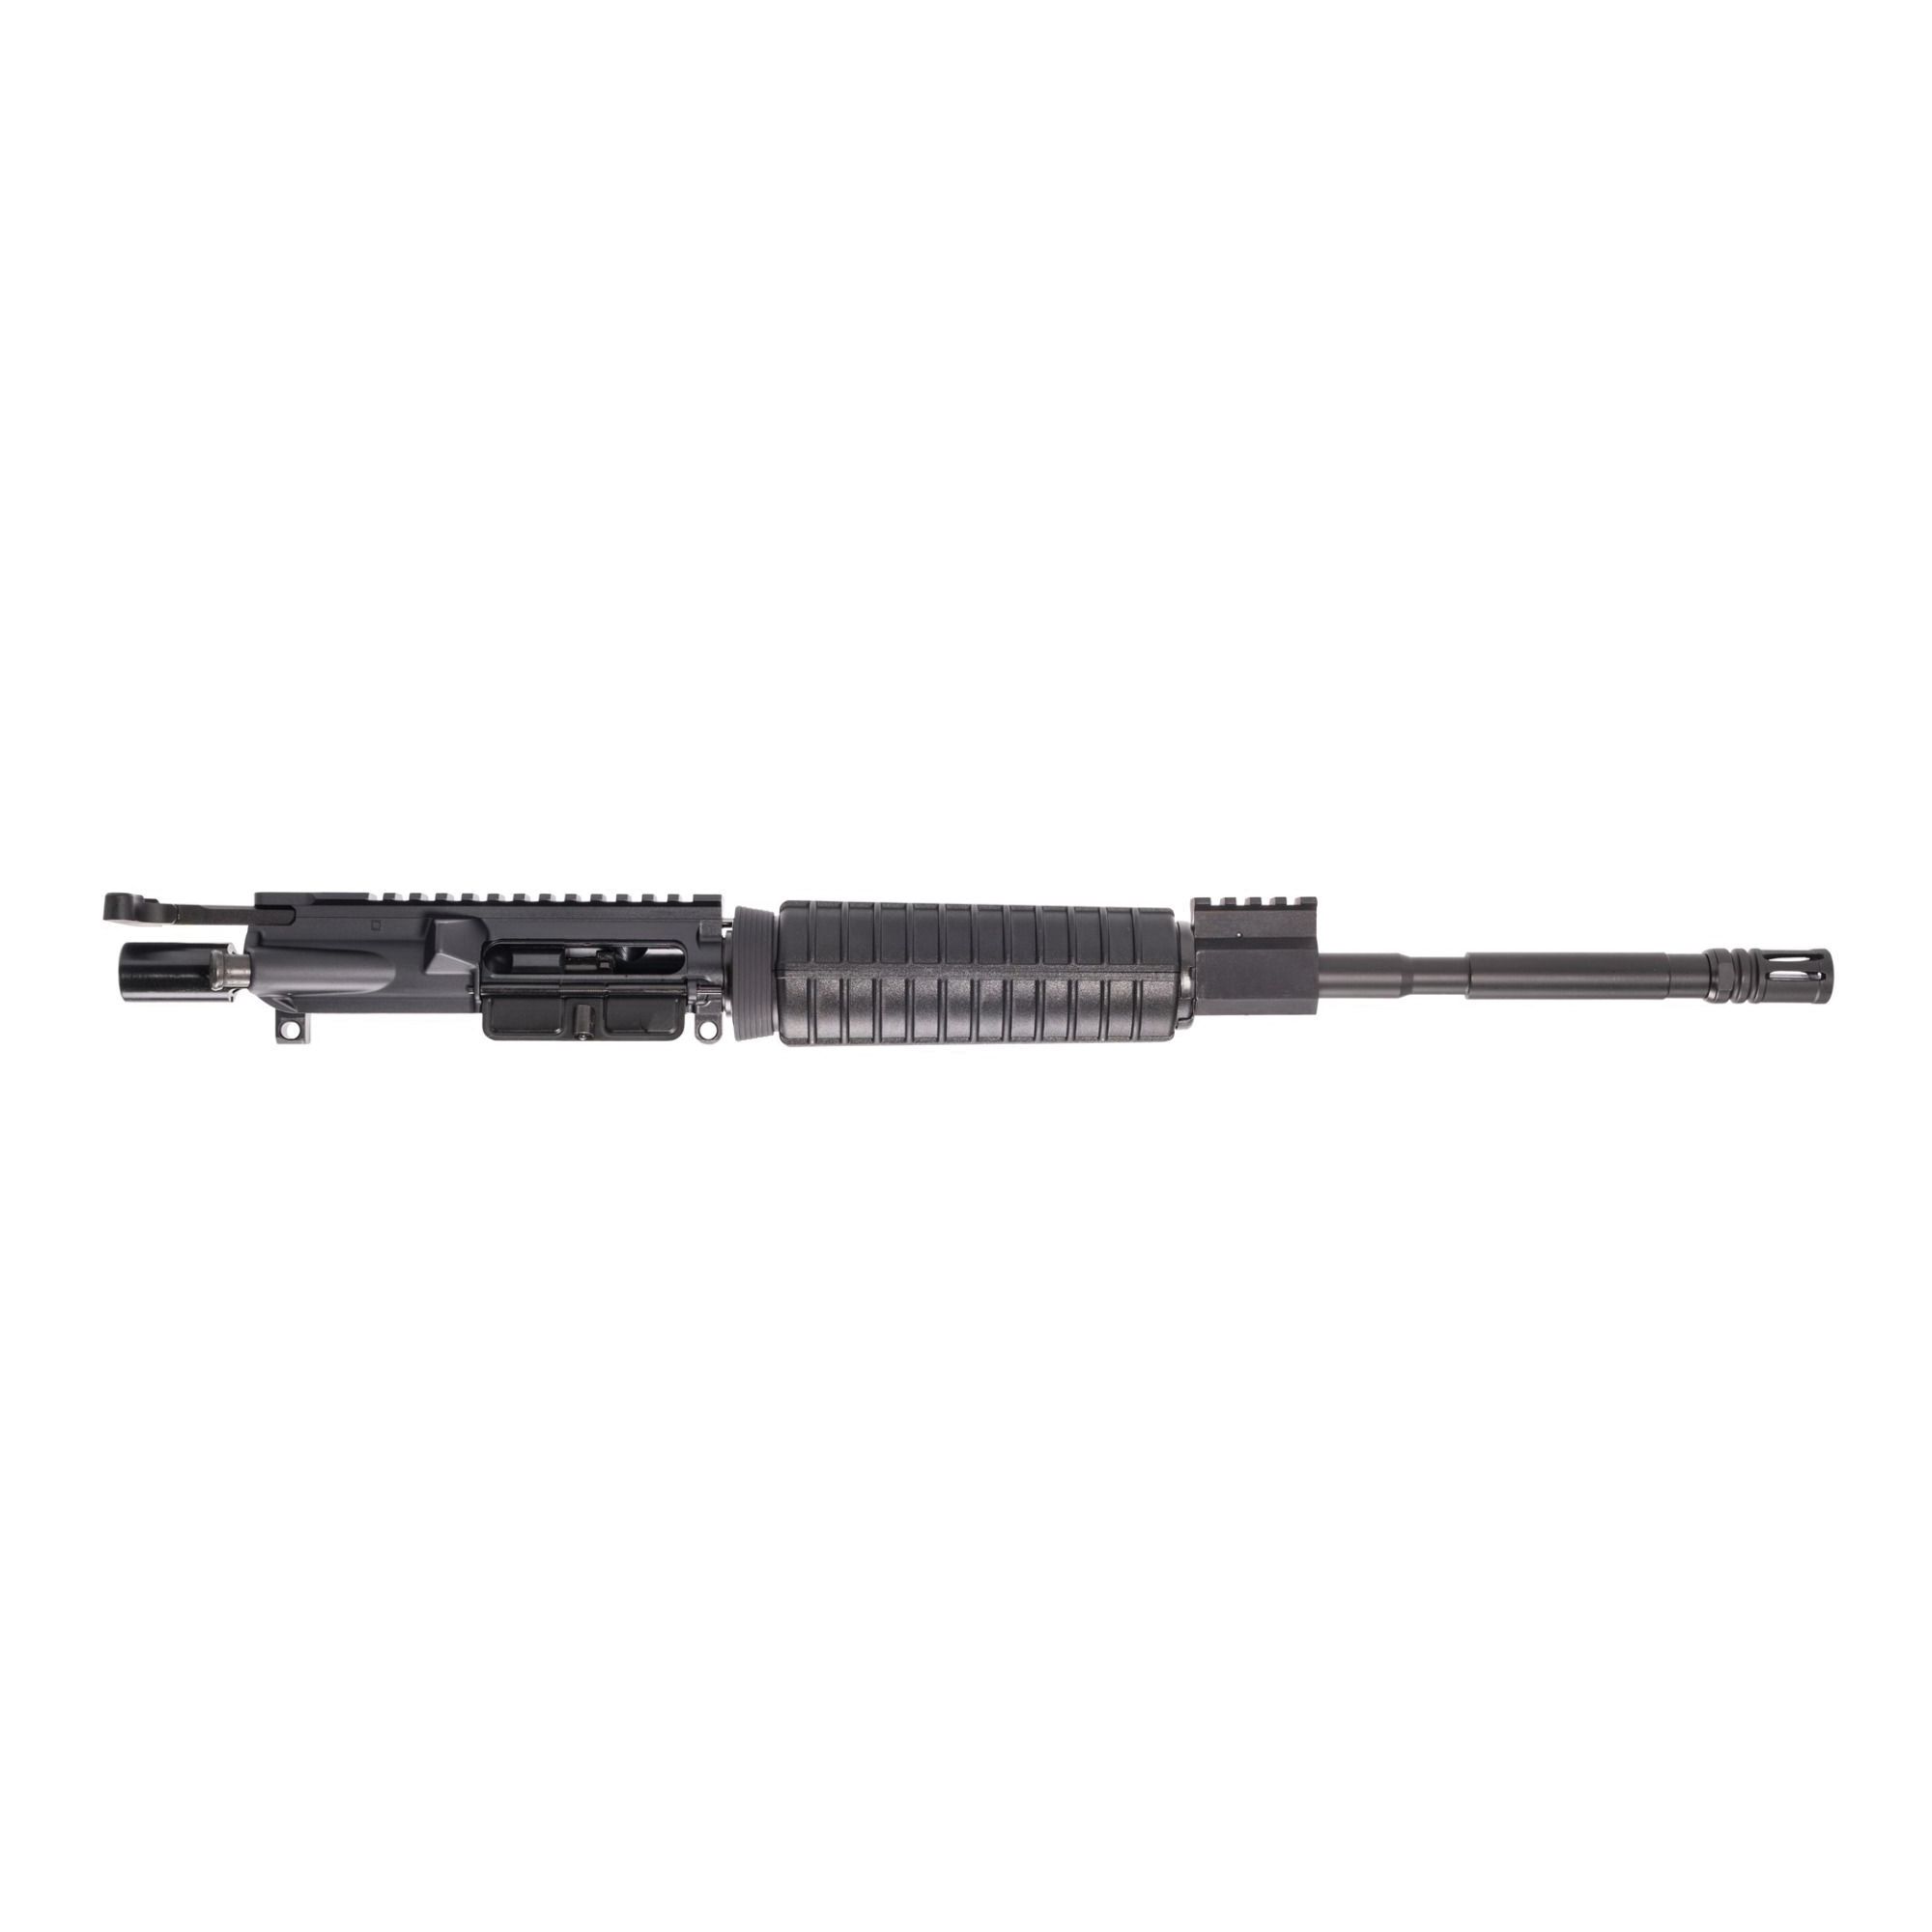 Anderson Manufacturing 16-inch Complete Upper for 6.5 Grendel